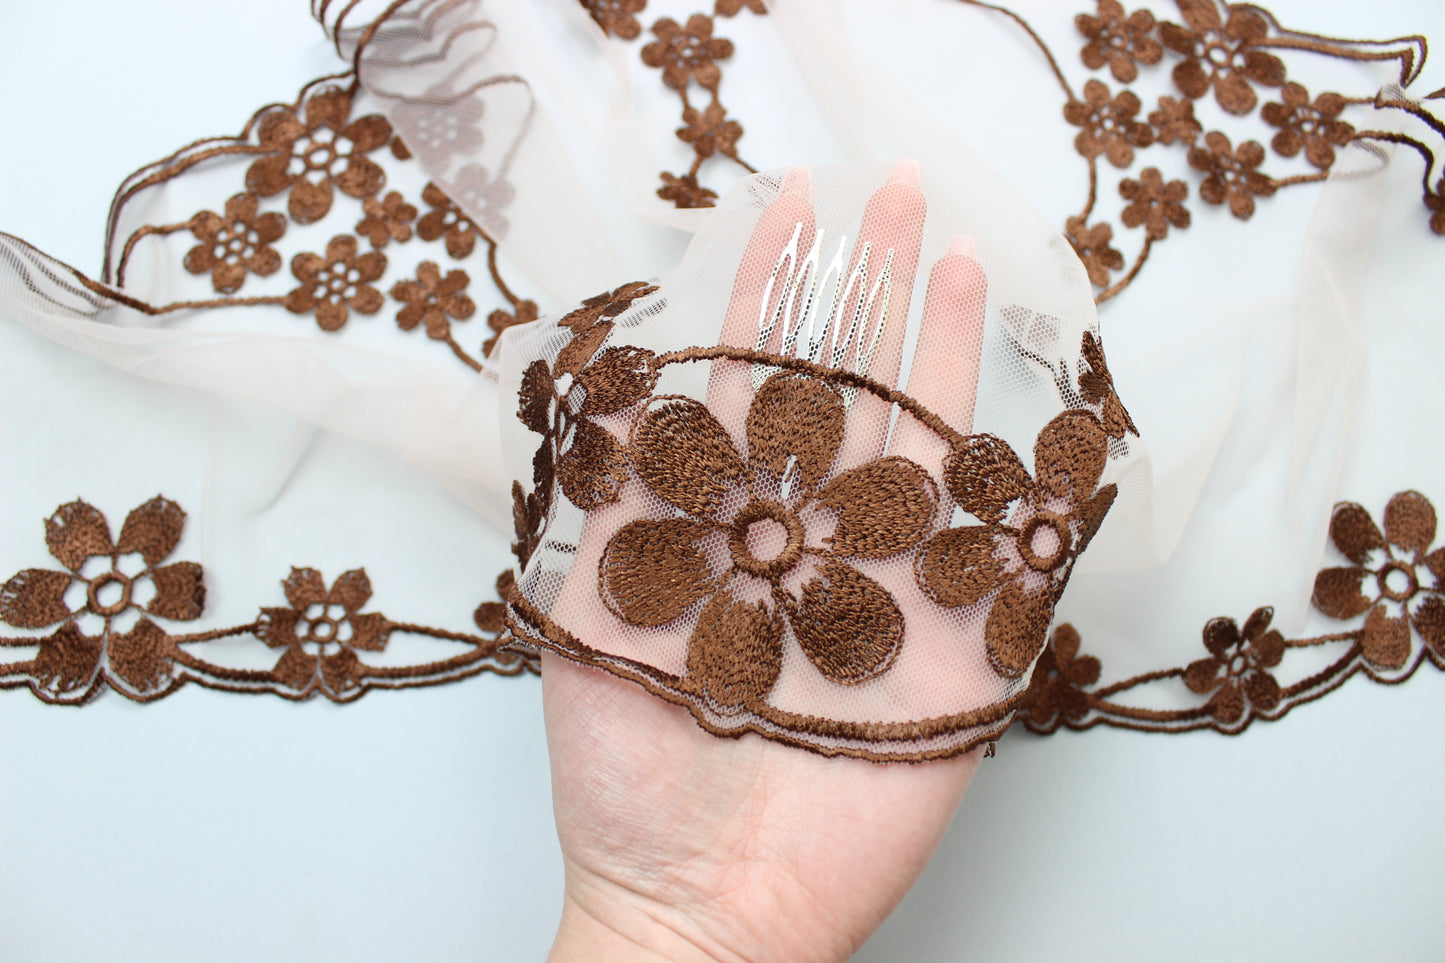 NEW COLOR Bestseller! Brown lace veil - MariaVeils